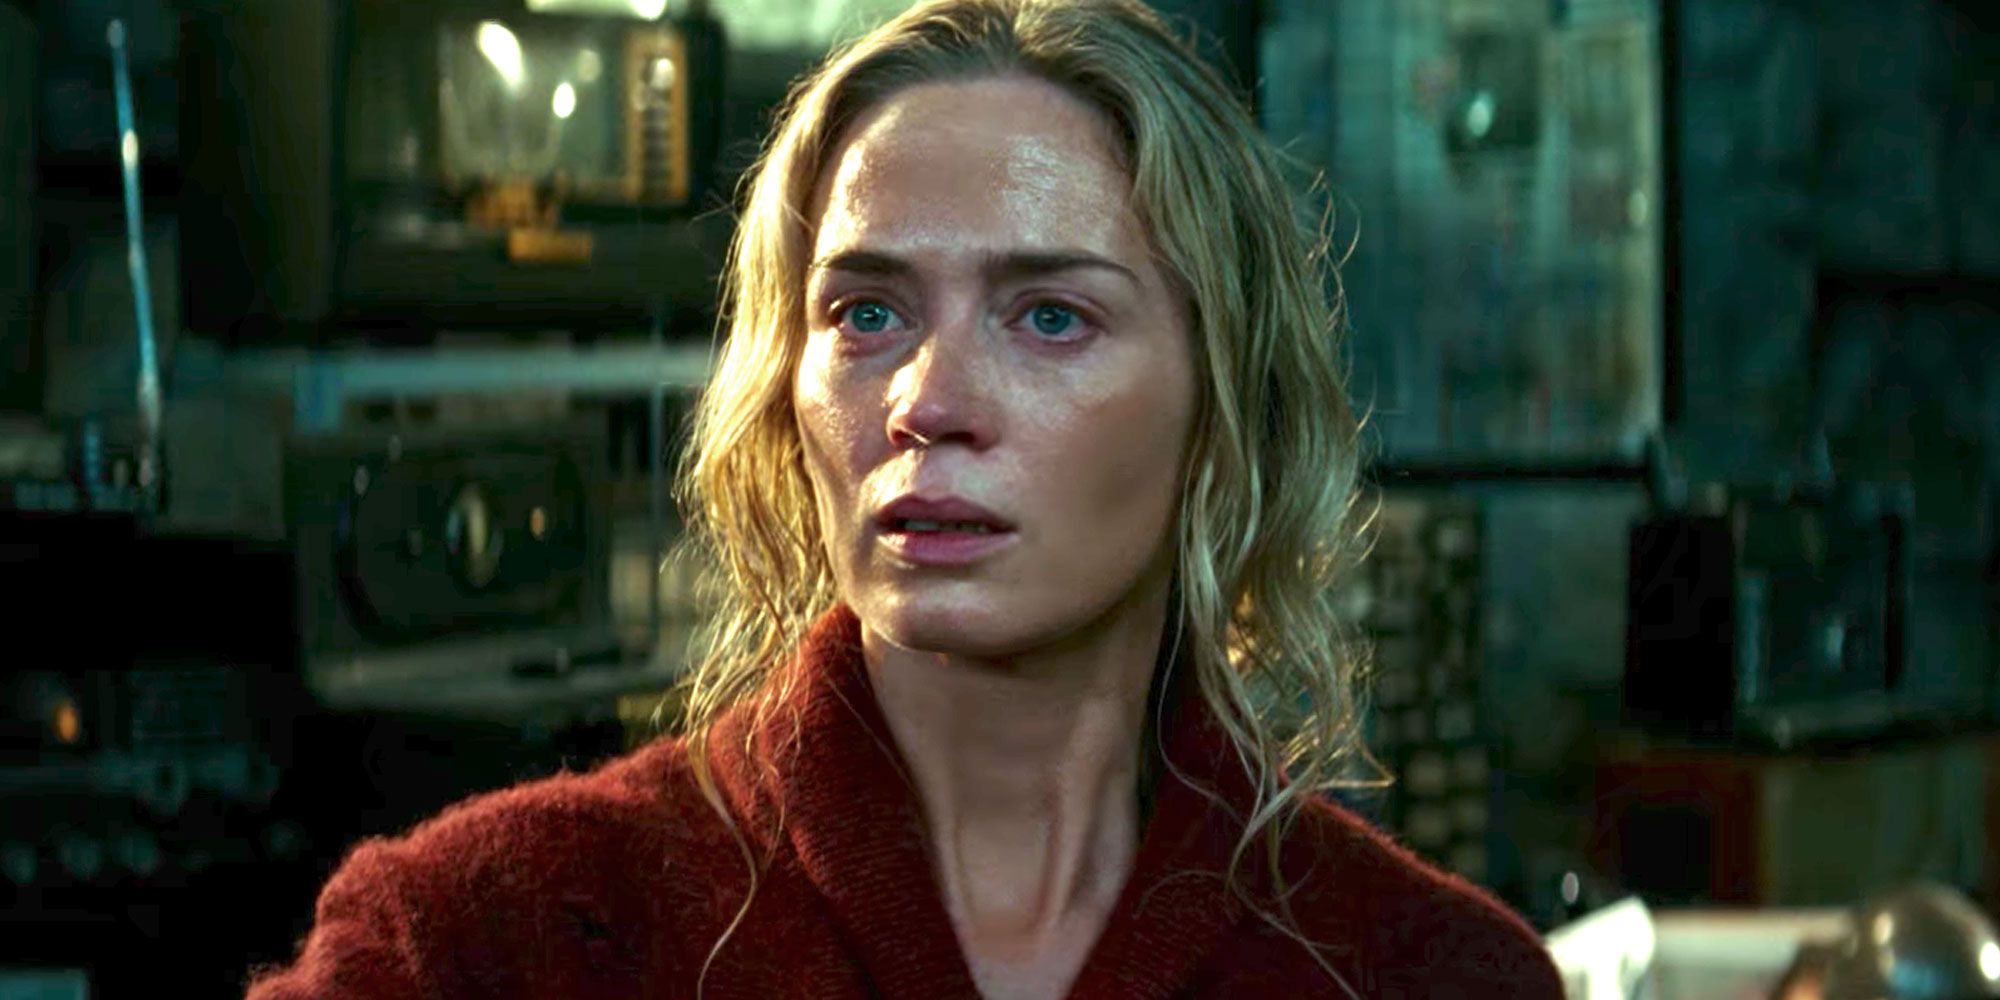 Emily Blunt looking determined in A Quiet Place.